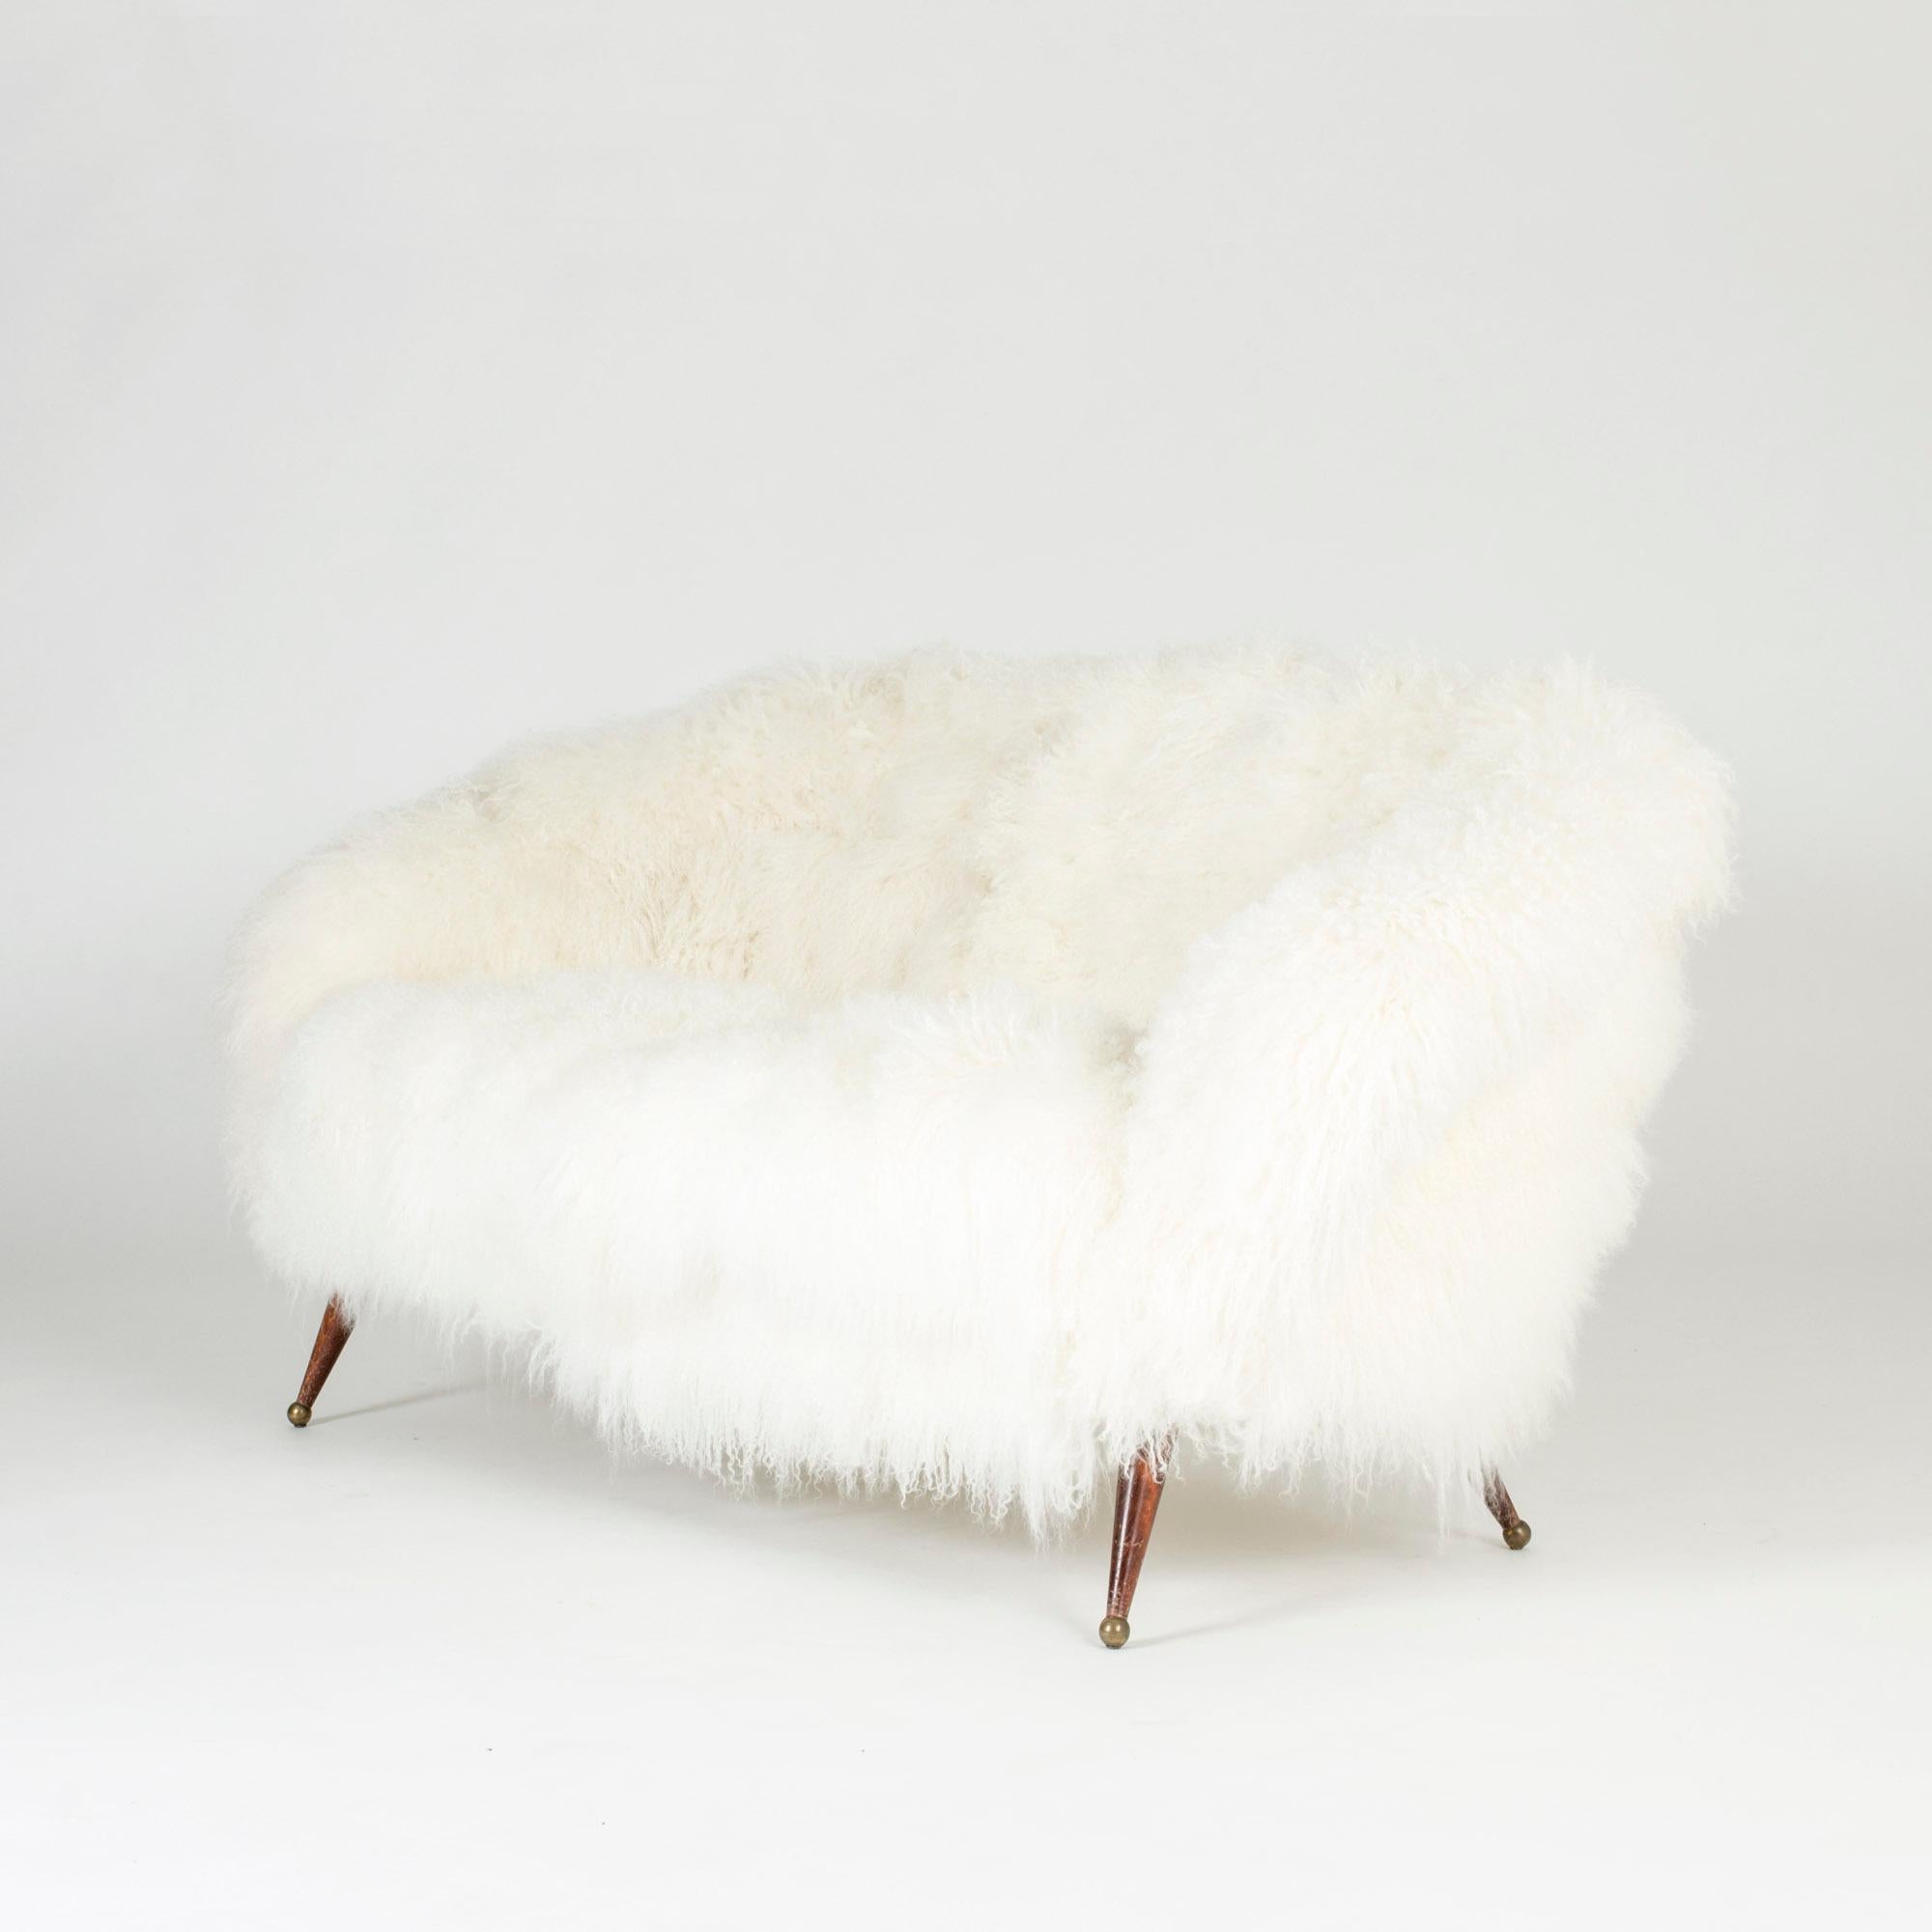 Stunning “Tellus” sofa by Folke Jansson, upholstered with white, long, wavy sheepskin. Rounded, wide and low design with slender legs with brass balls as feet.